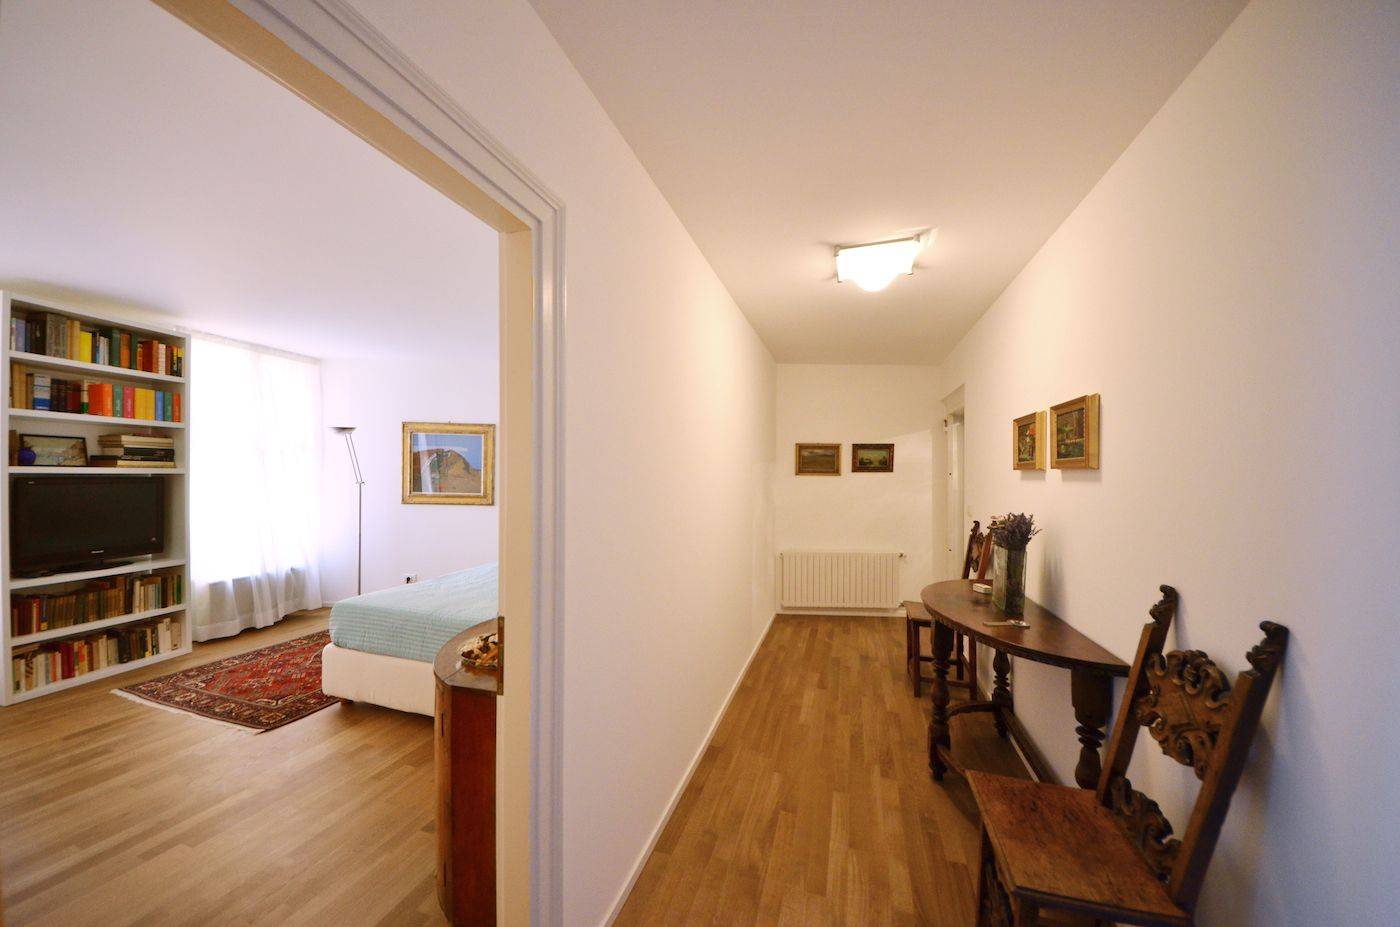 entrance room of the Vendramin apartment that leads to the master bedroom